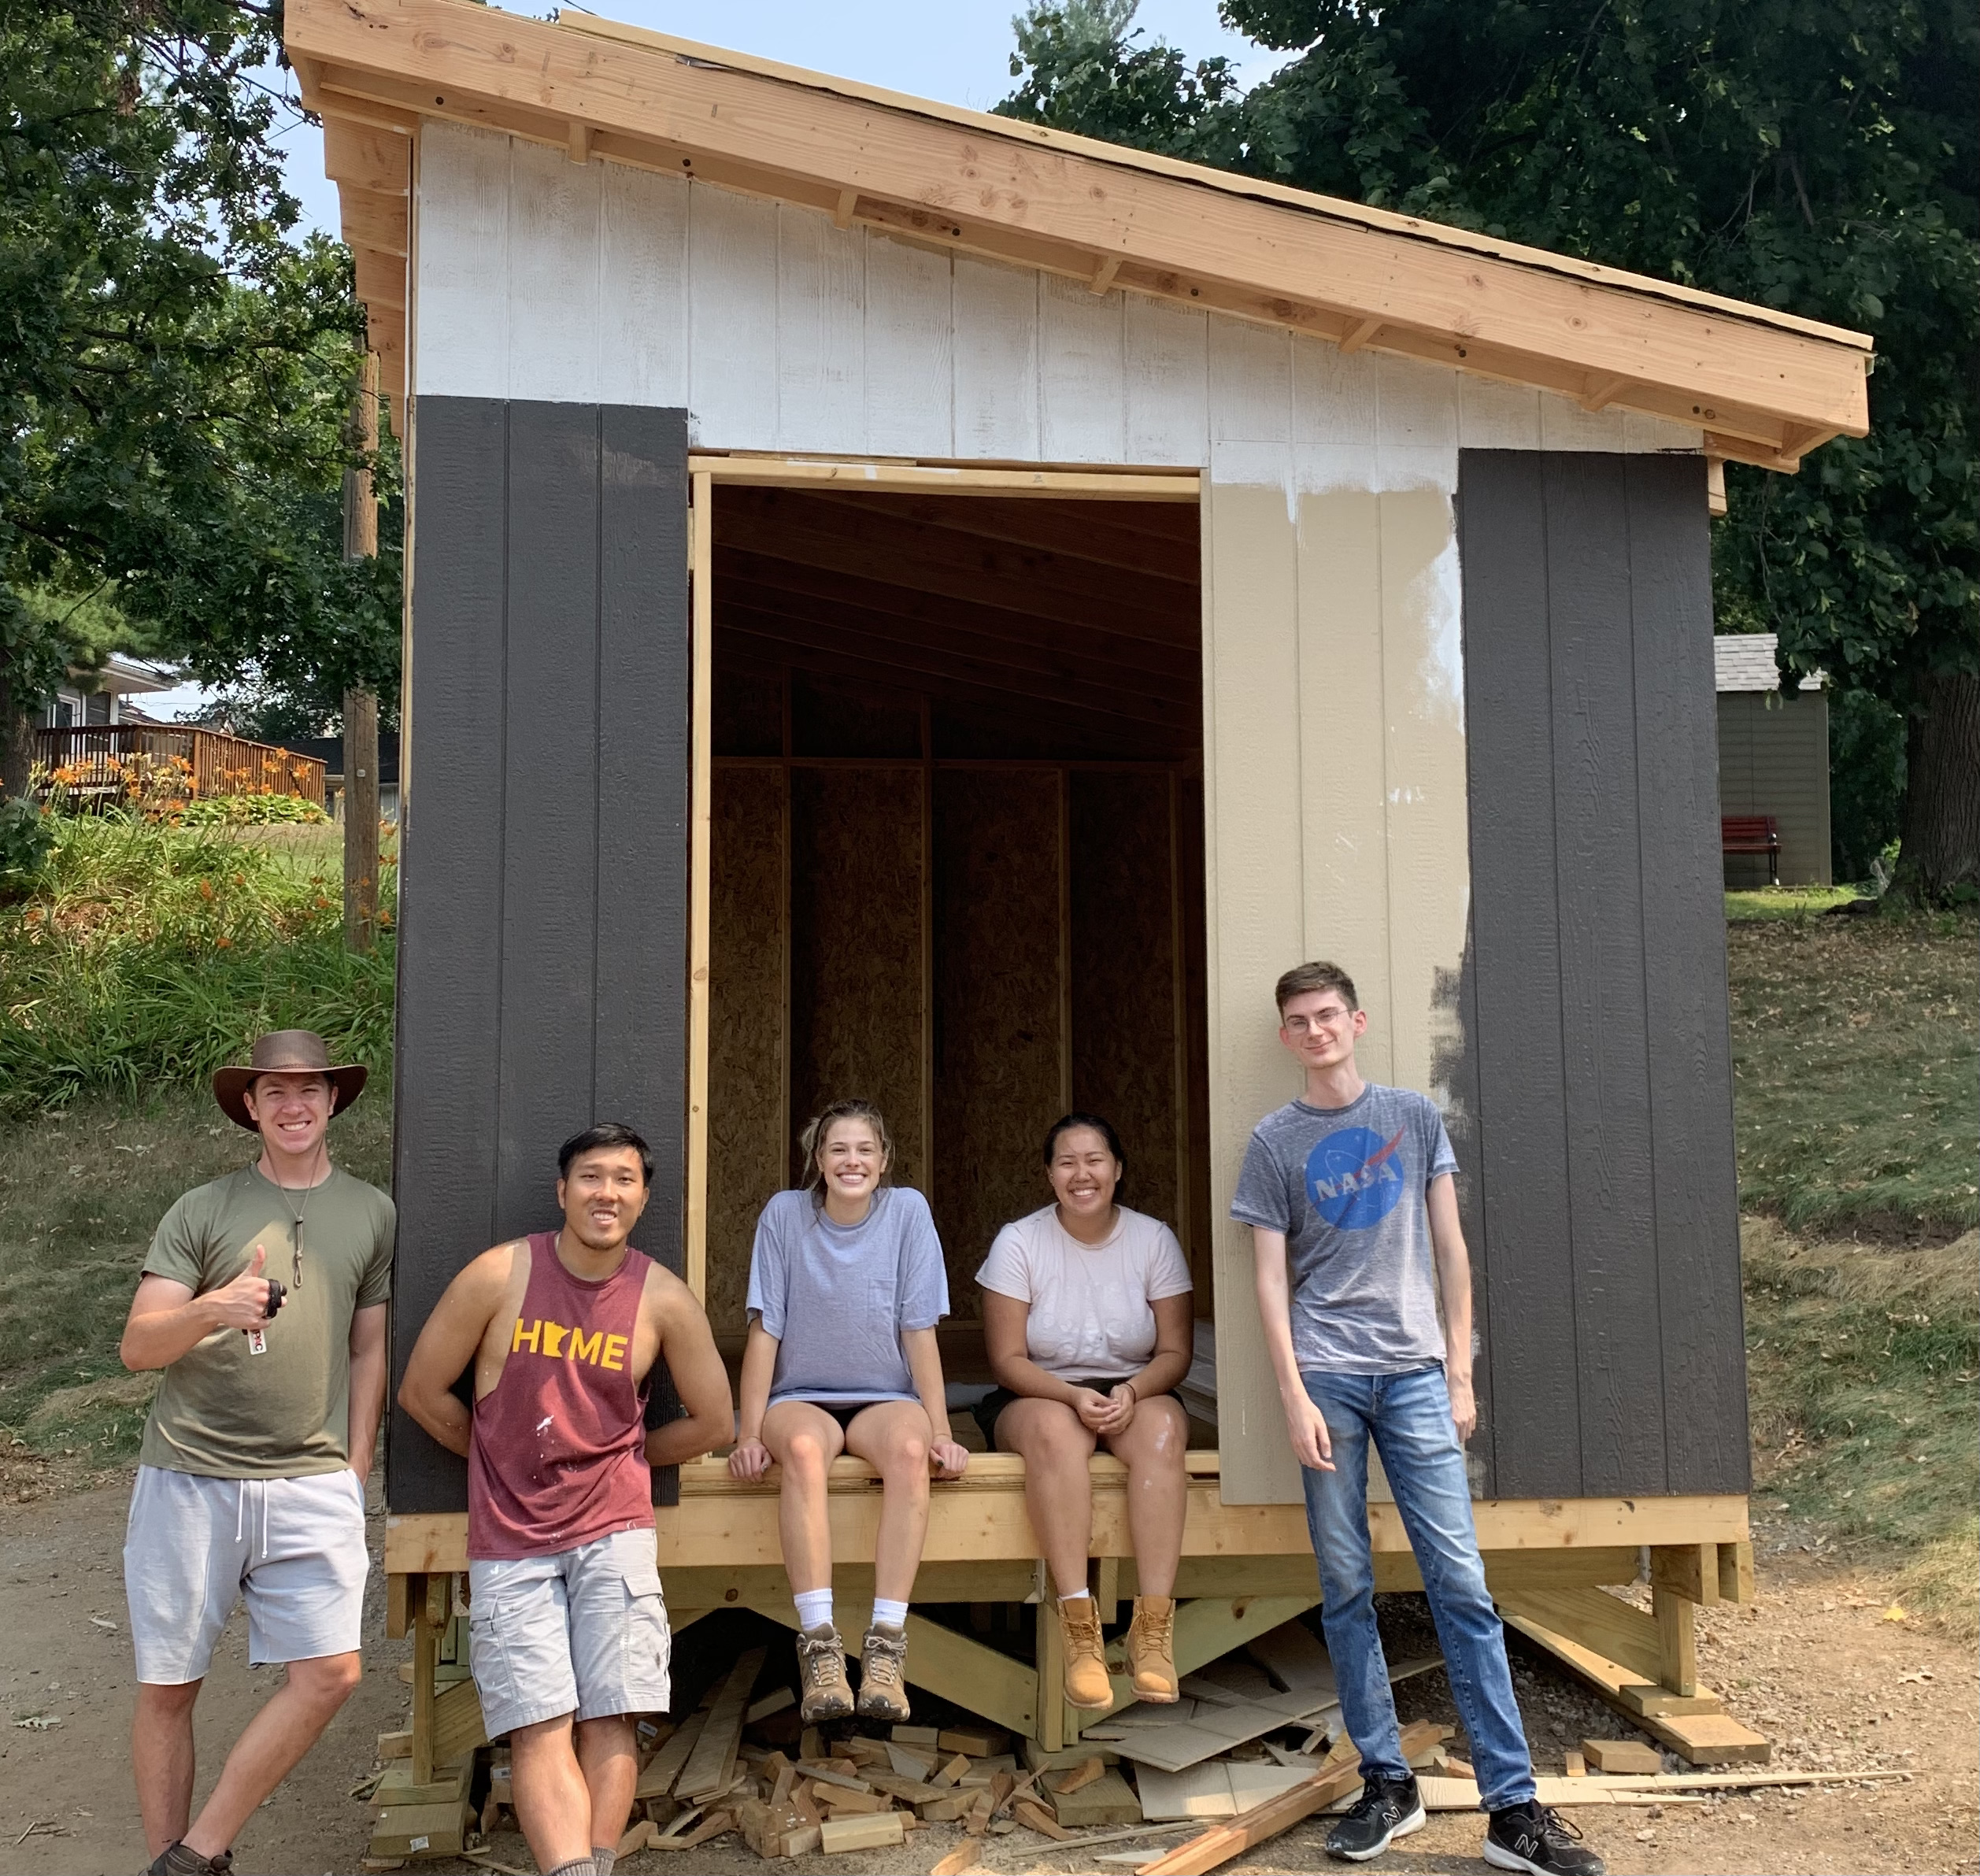 Students in AIAS Freedom by Design stand in front of the tool shed they built.